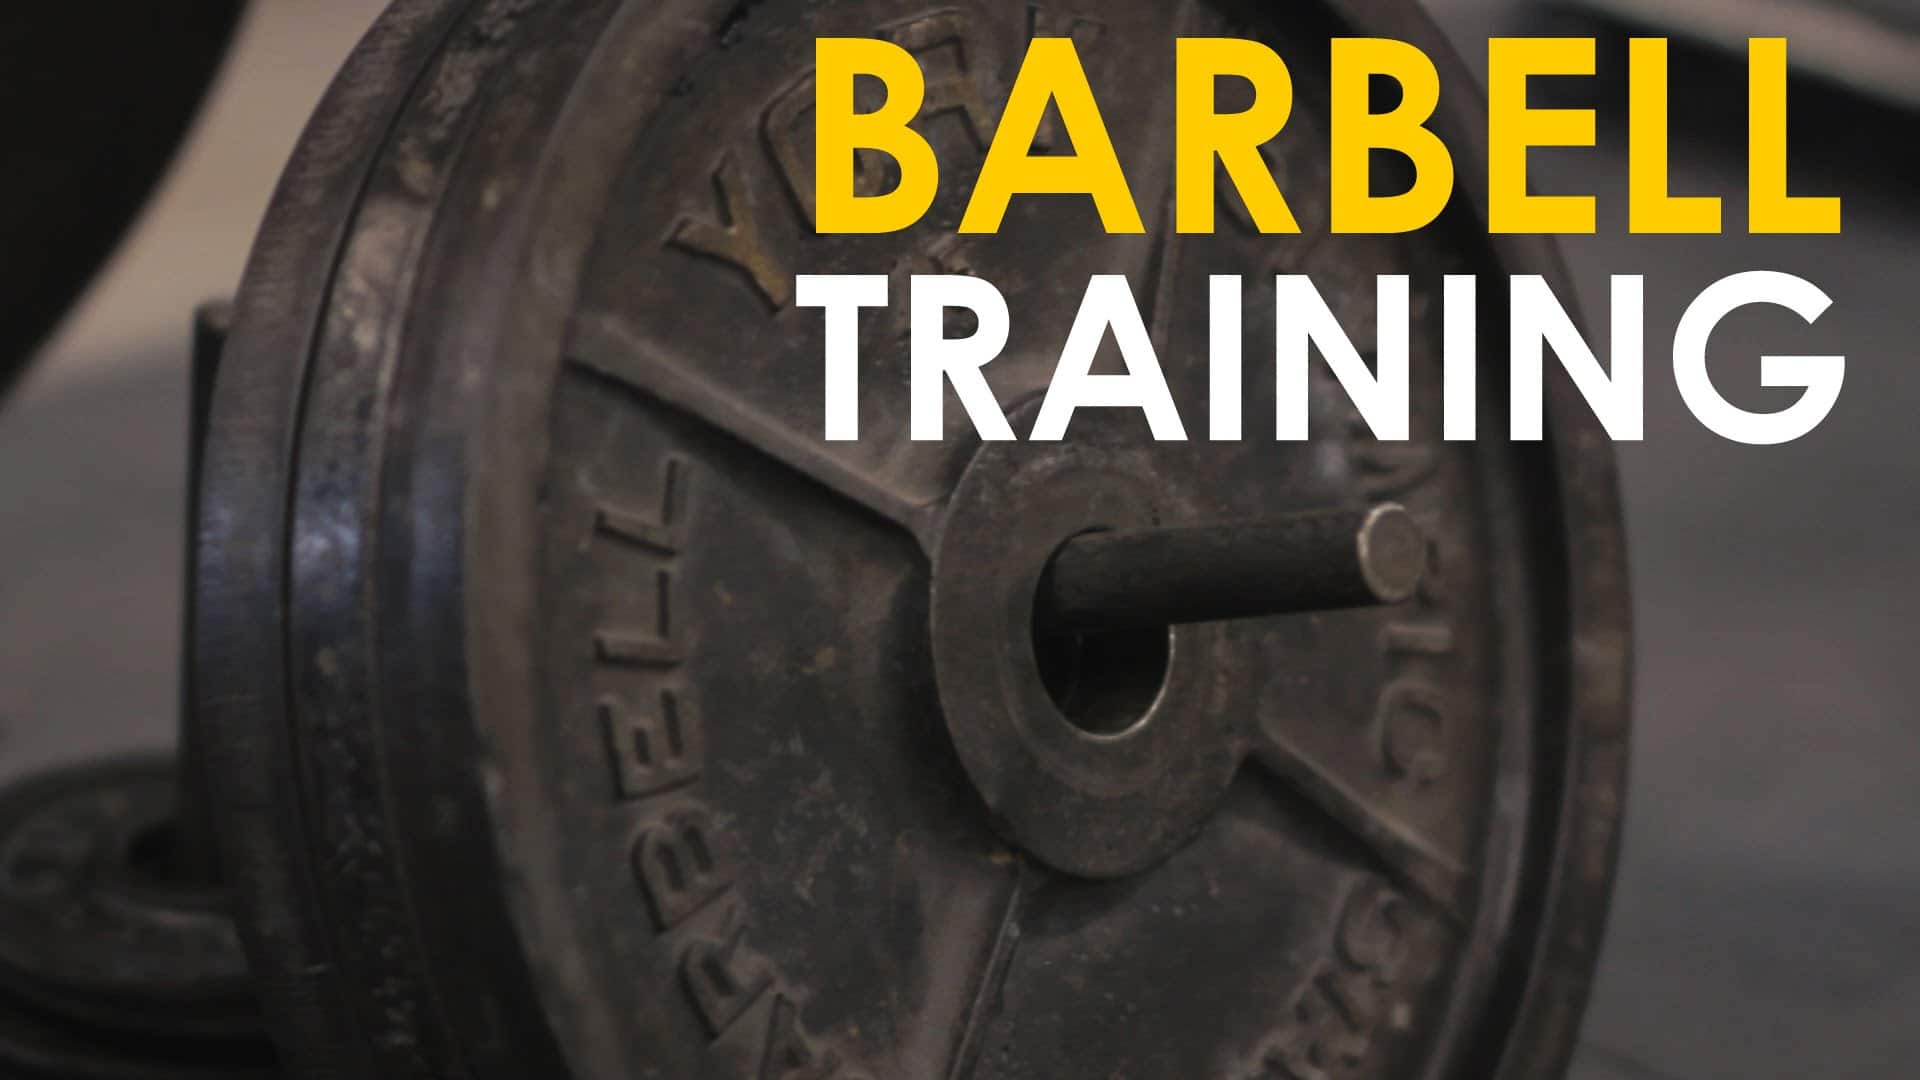 This barbell features the words "Barbell Training" for an introductory fitness program.